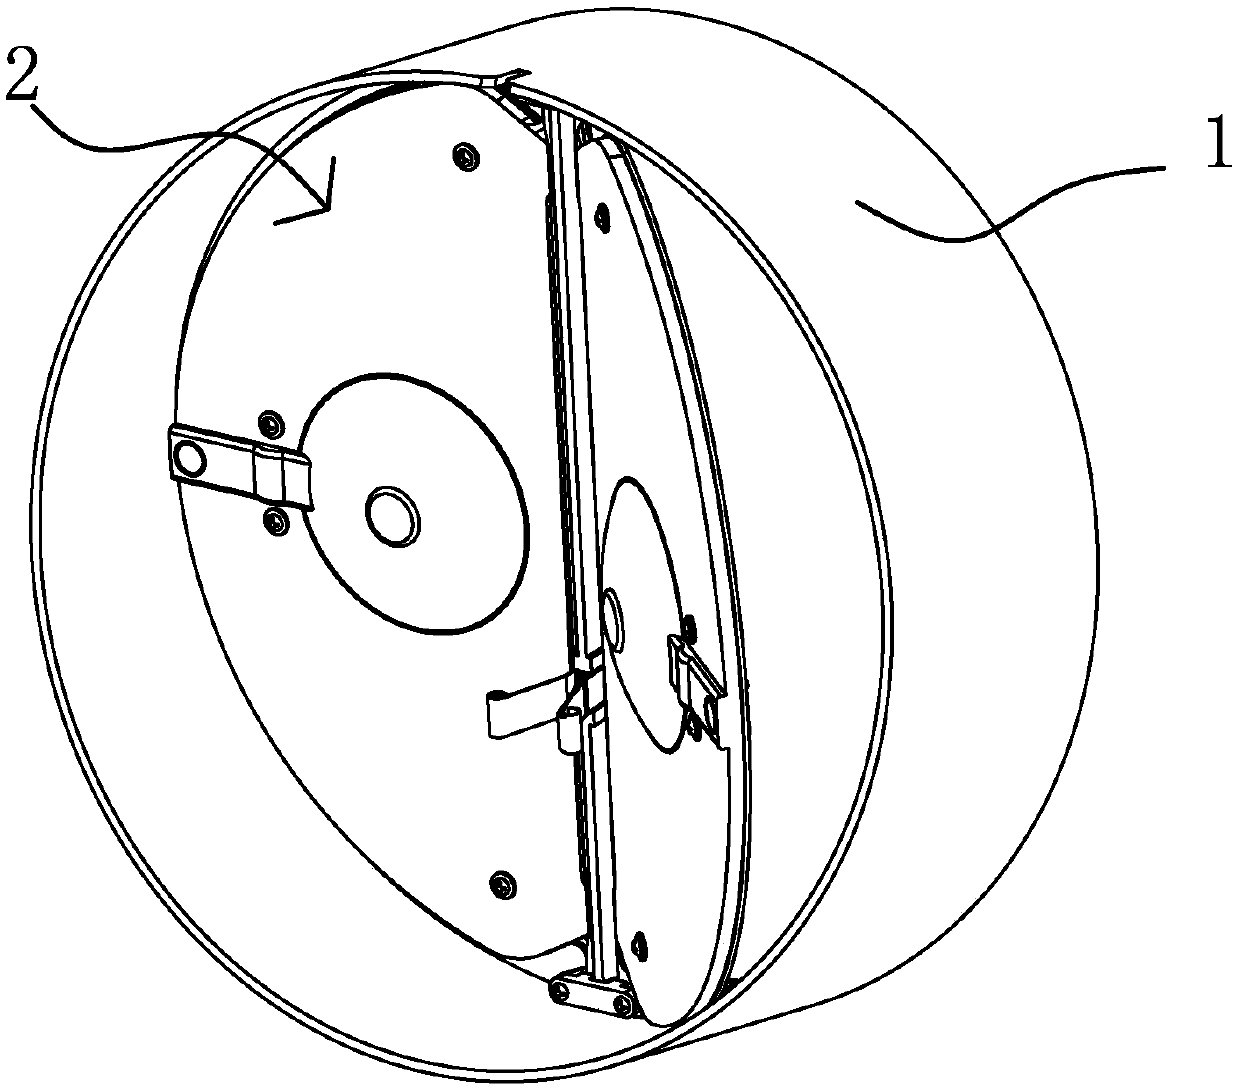 Auxiliary opening mechanism for flue check valve